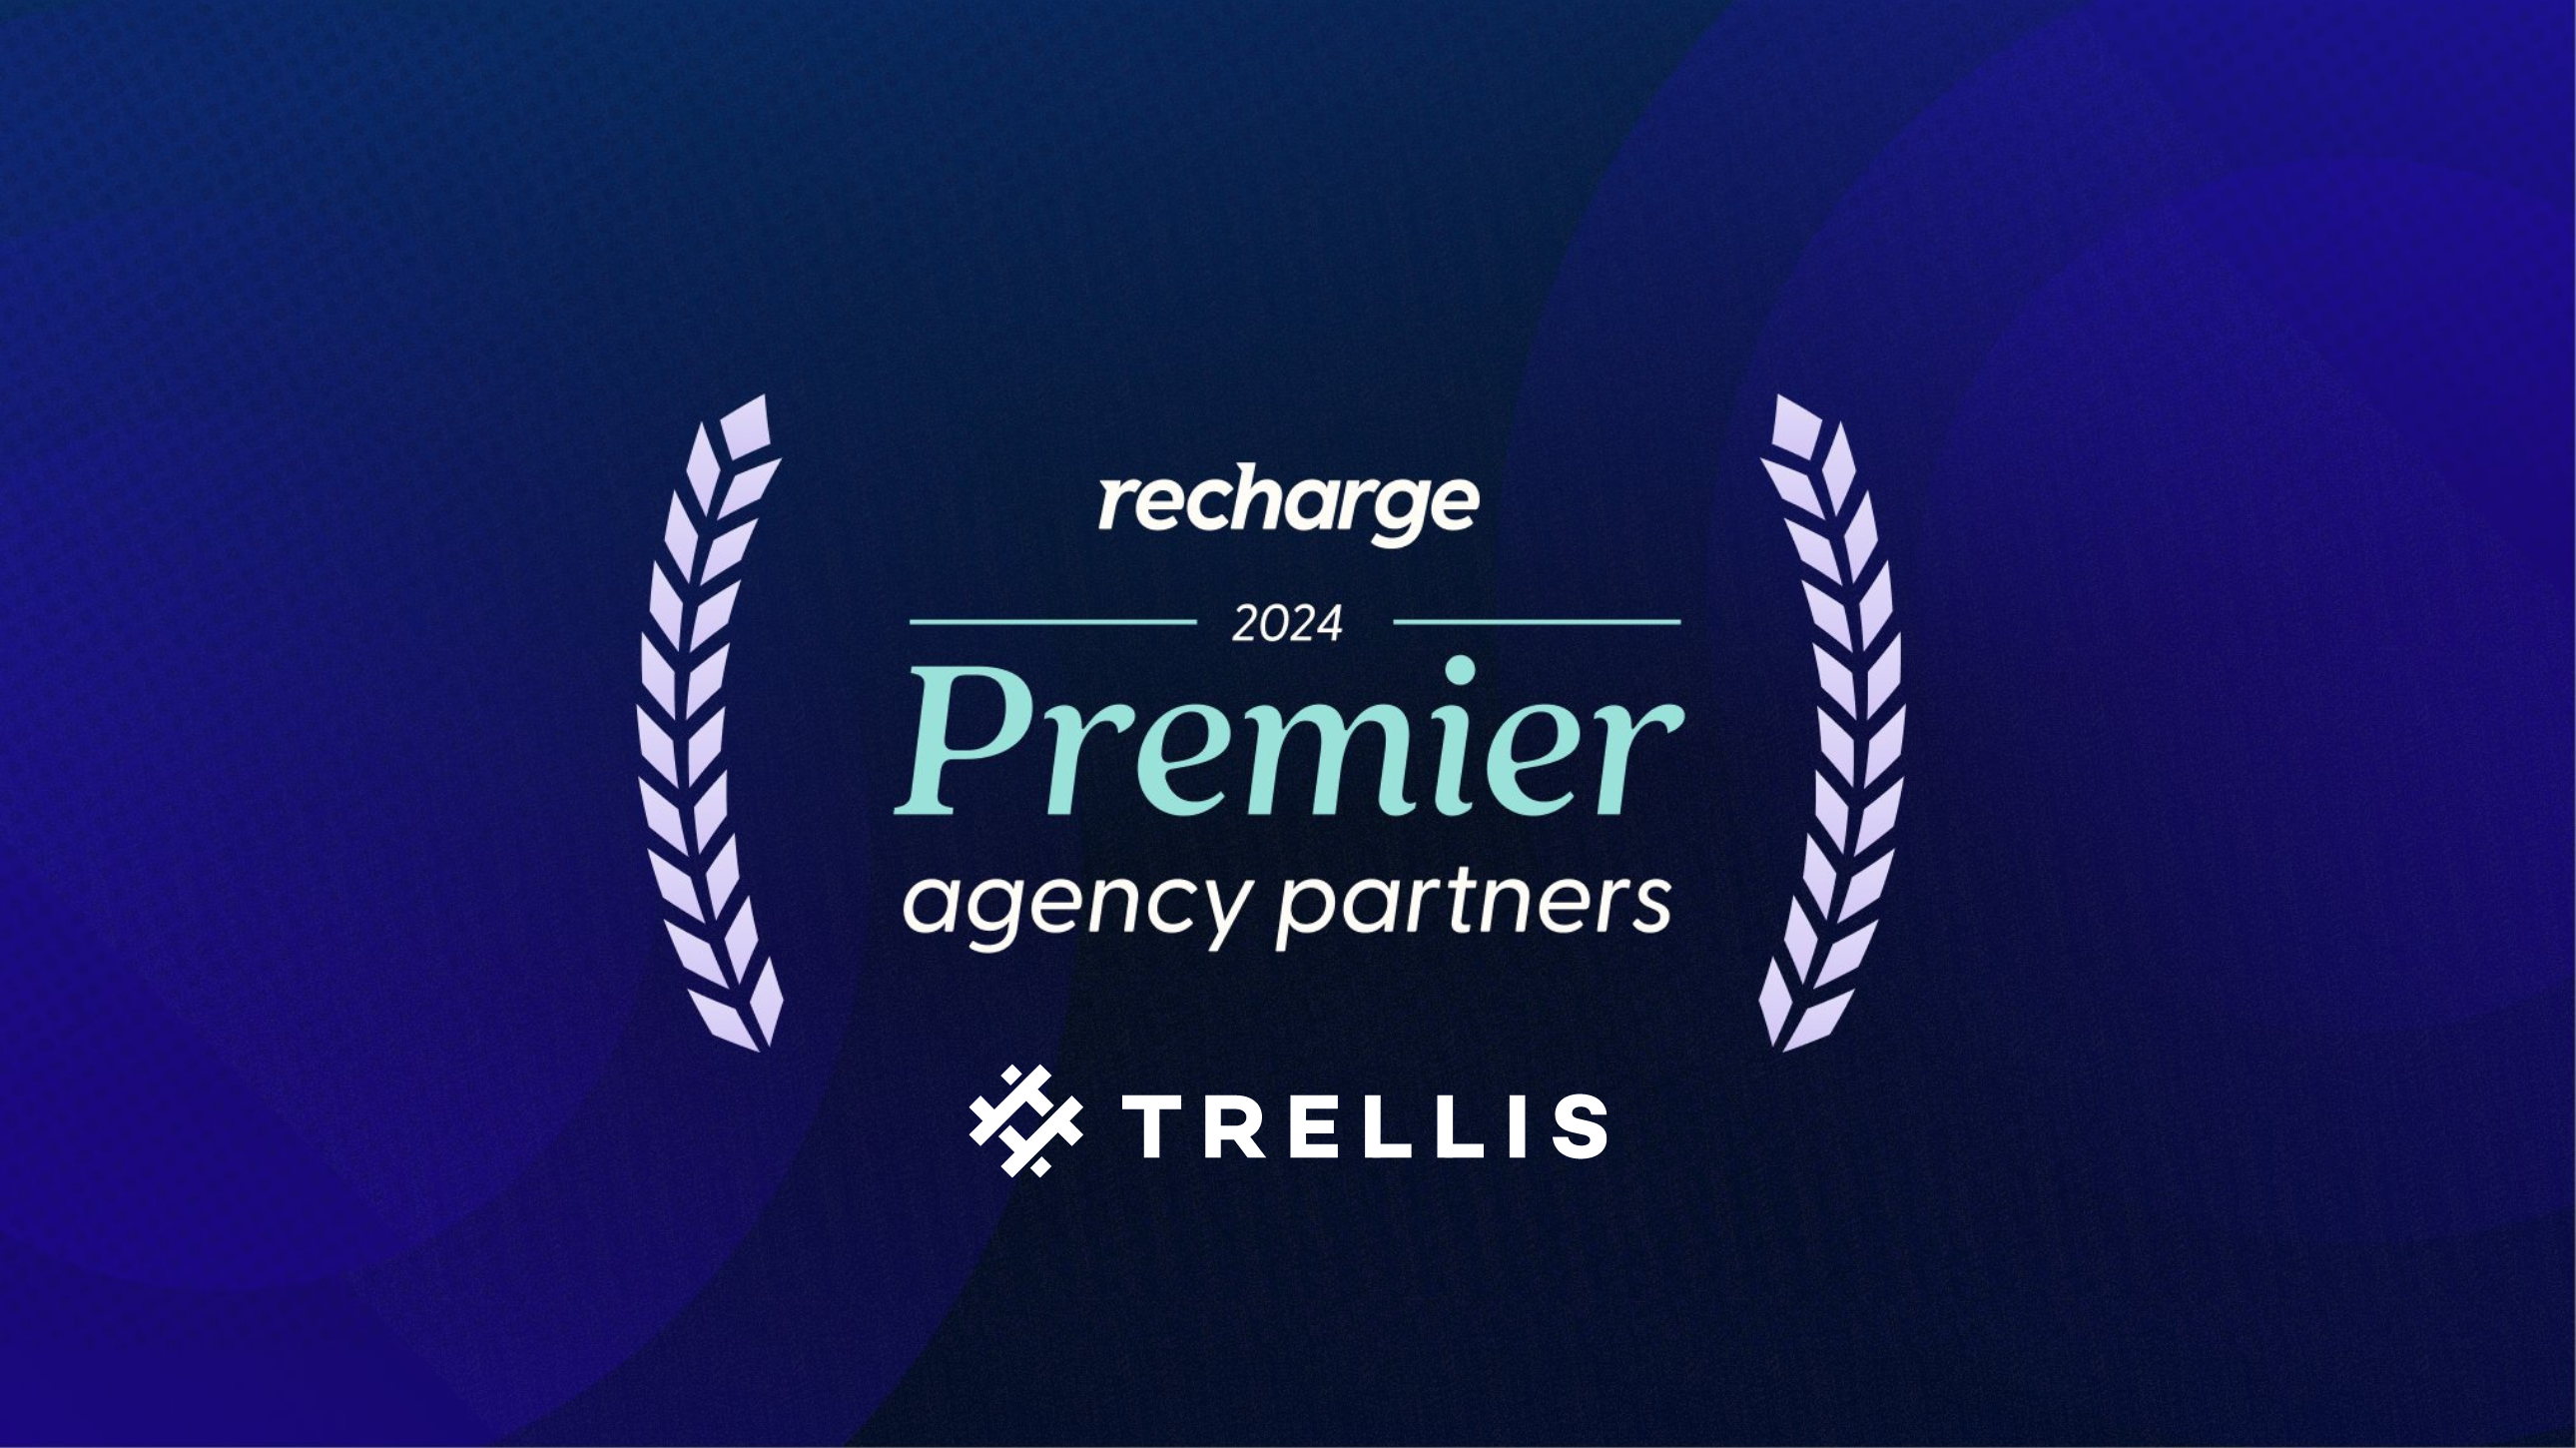 Recharge 2024 Premier Agency Partners graphic with Trellis logo.